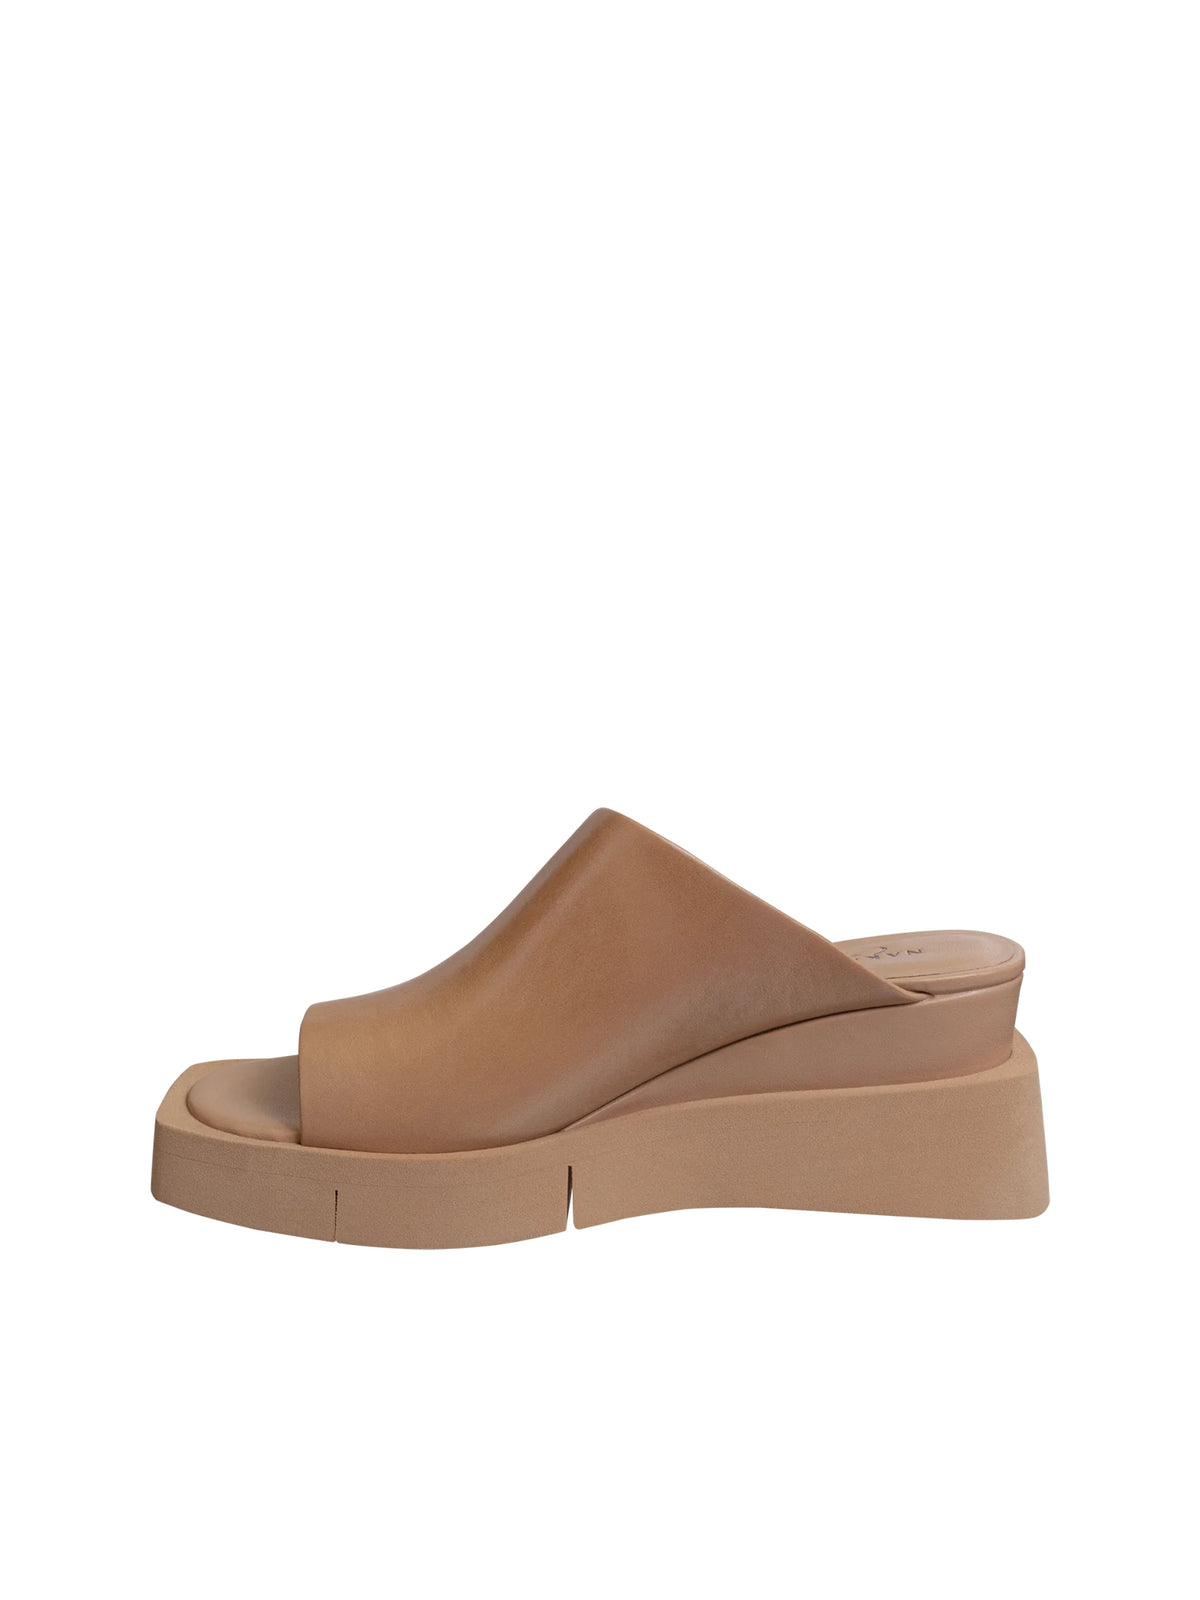 naked feet infinity wedge sandals in camel